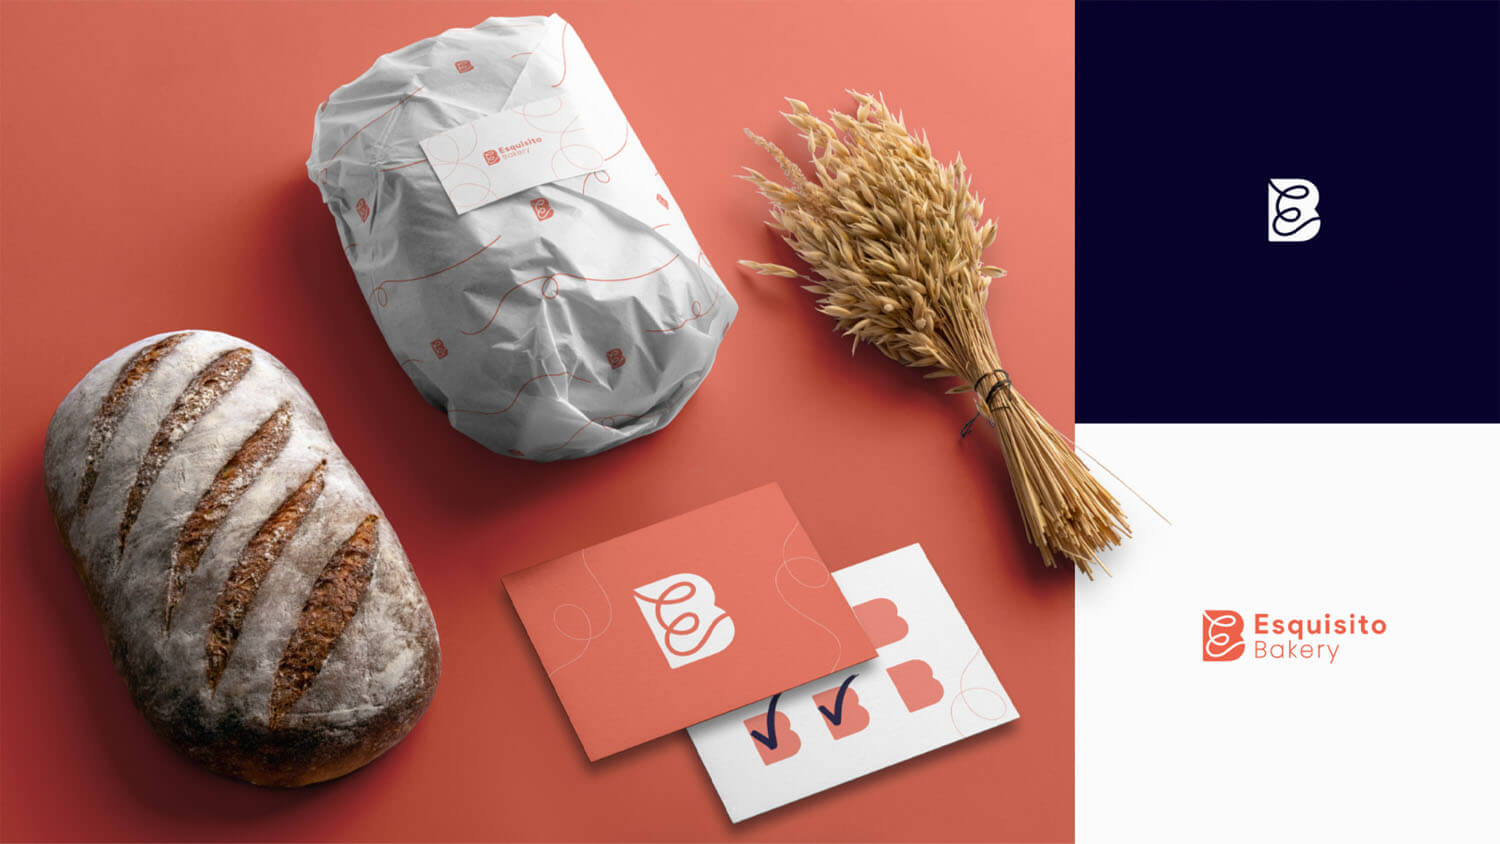 A rebranding image board for Esquisito Bakery showcasing their wrapping, a loaf of bread, business cards, and their new logo.